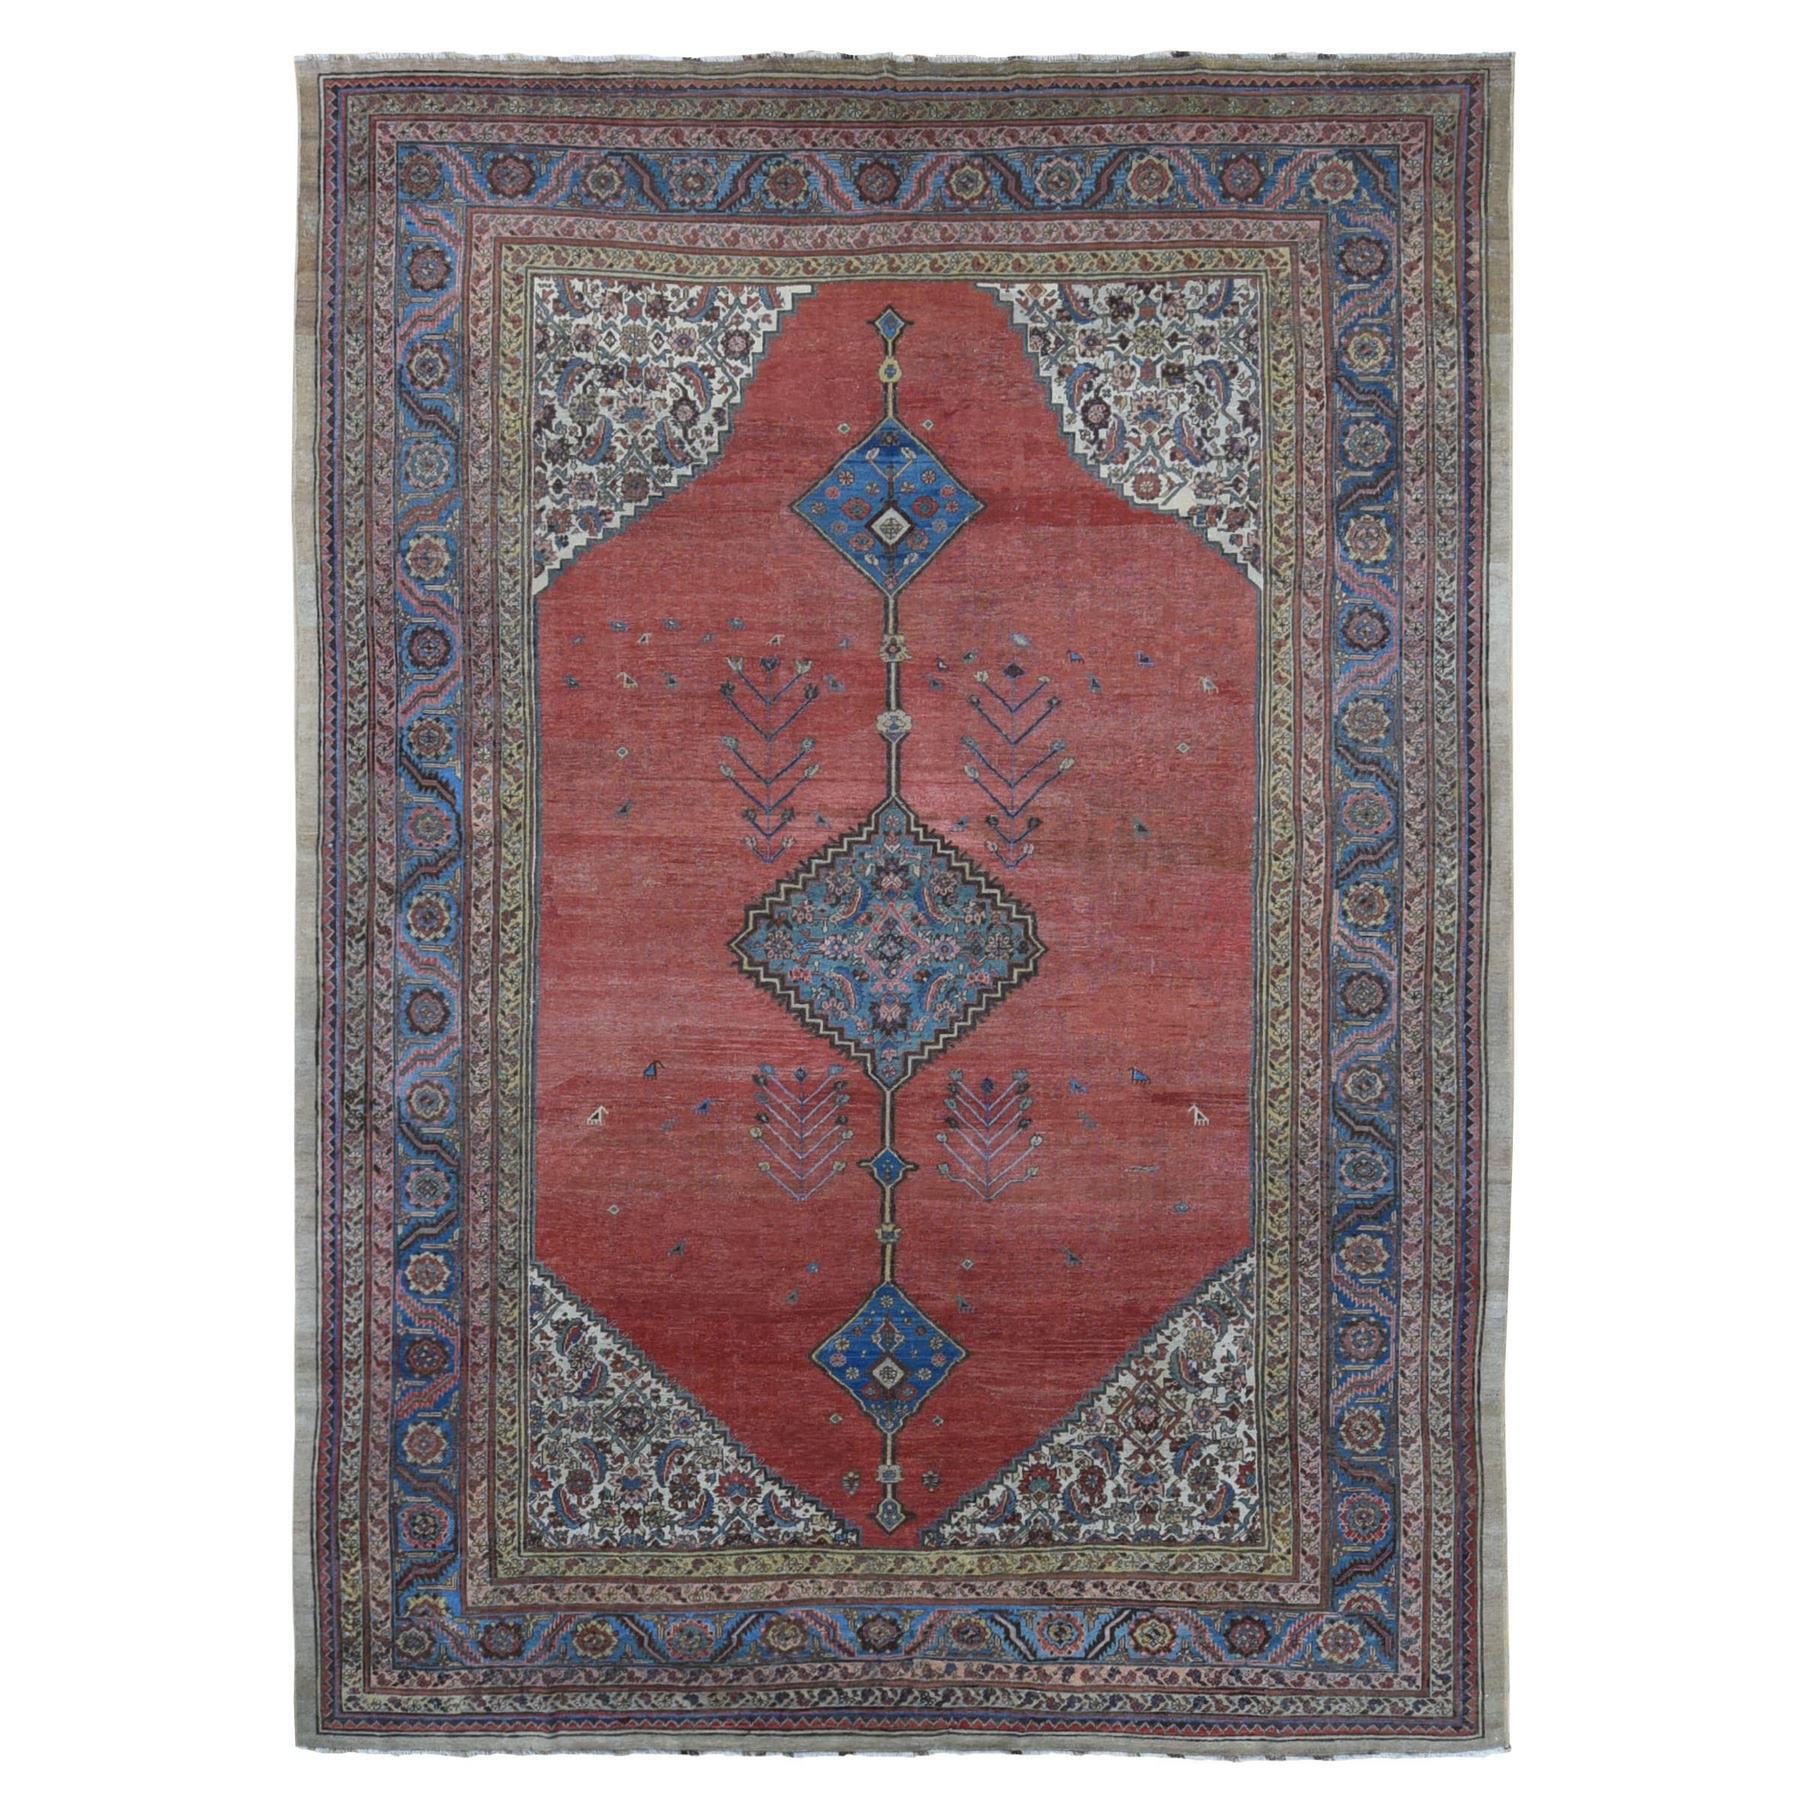 10'9"x15'9" Terracotta Red, Antique Persian Bakshaish Encored Medallion Design with Camel Hair, Hand Woven, Even Wear, Clean, Sides and Ends Professionally Secured, Oversized Oriental Rug 